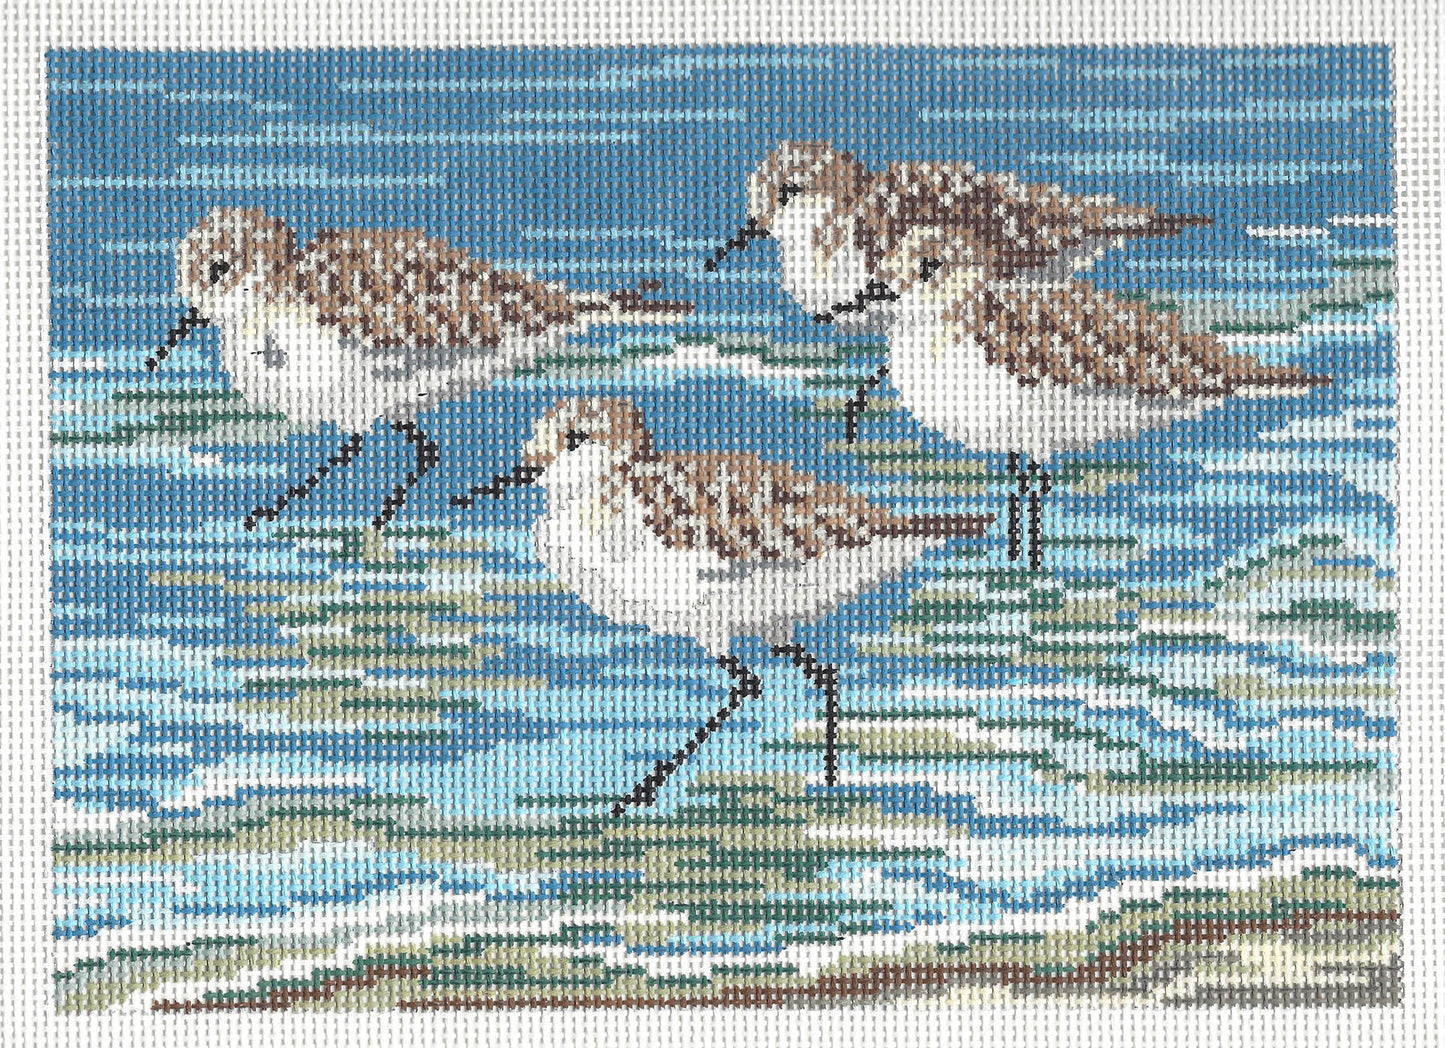 Bird Canvas ~ Four Sanderlings On The Beach 13 mesh handpainted Needlepoint Canvas by Needle Crossings